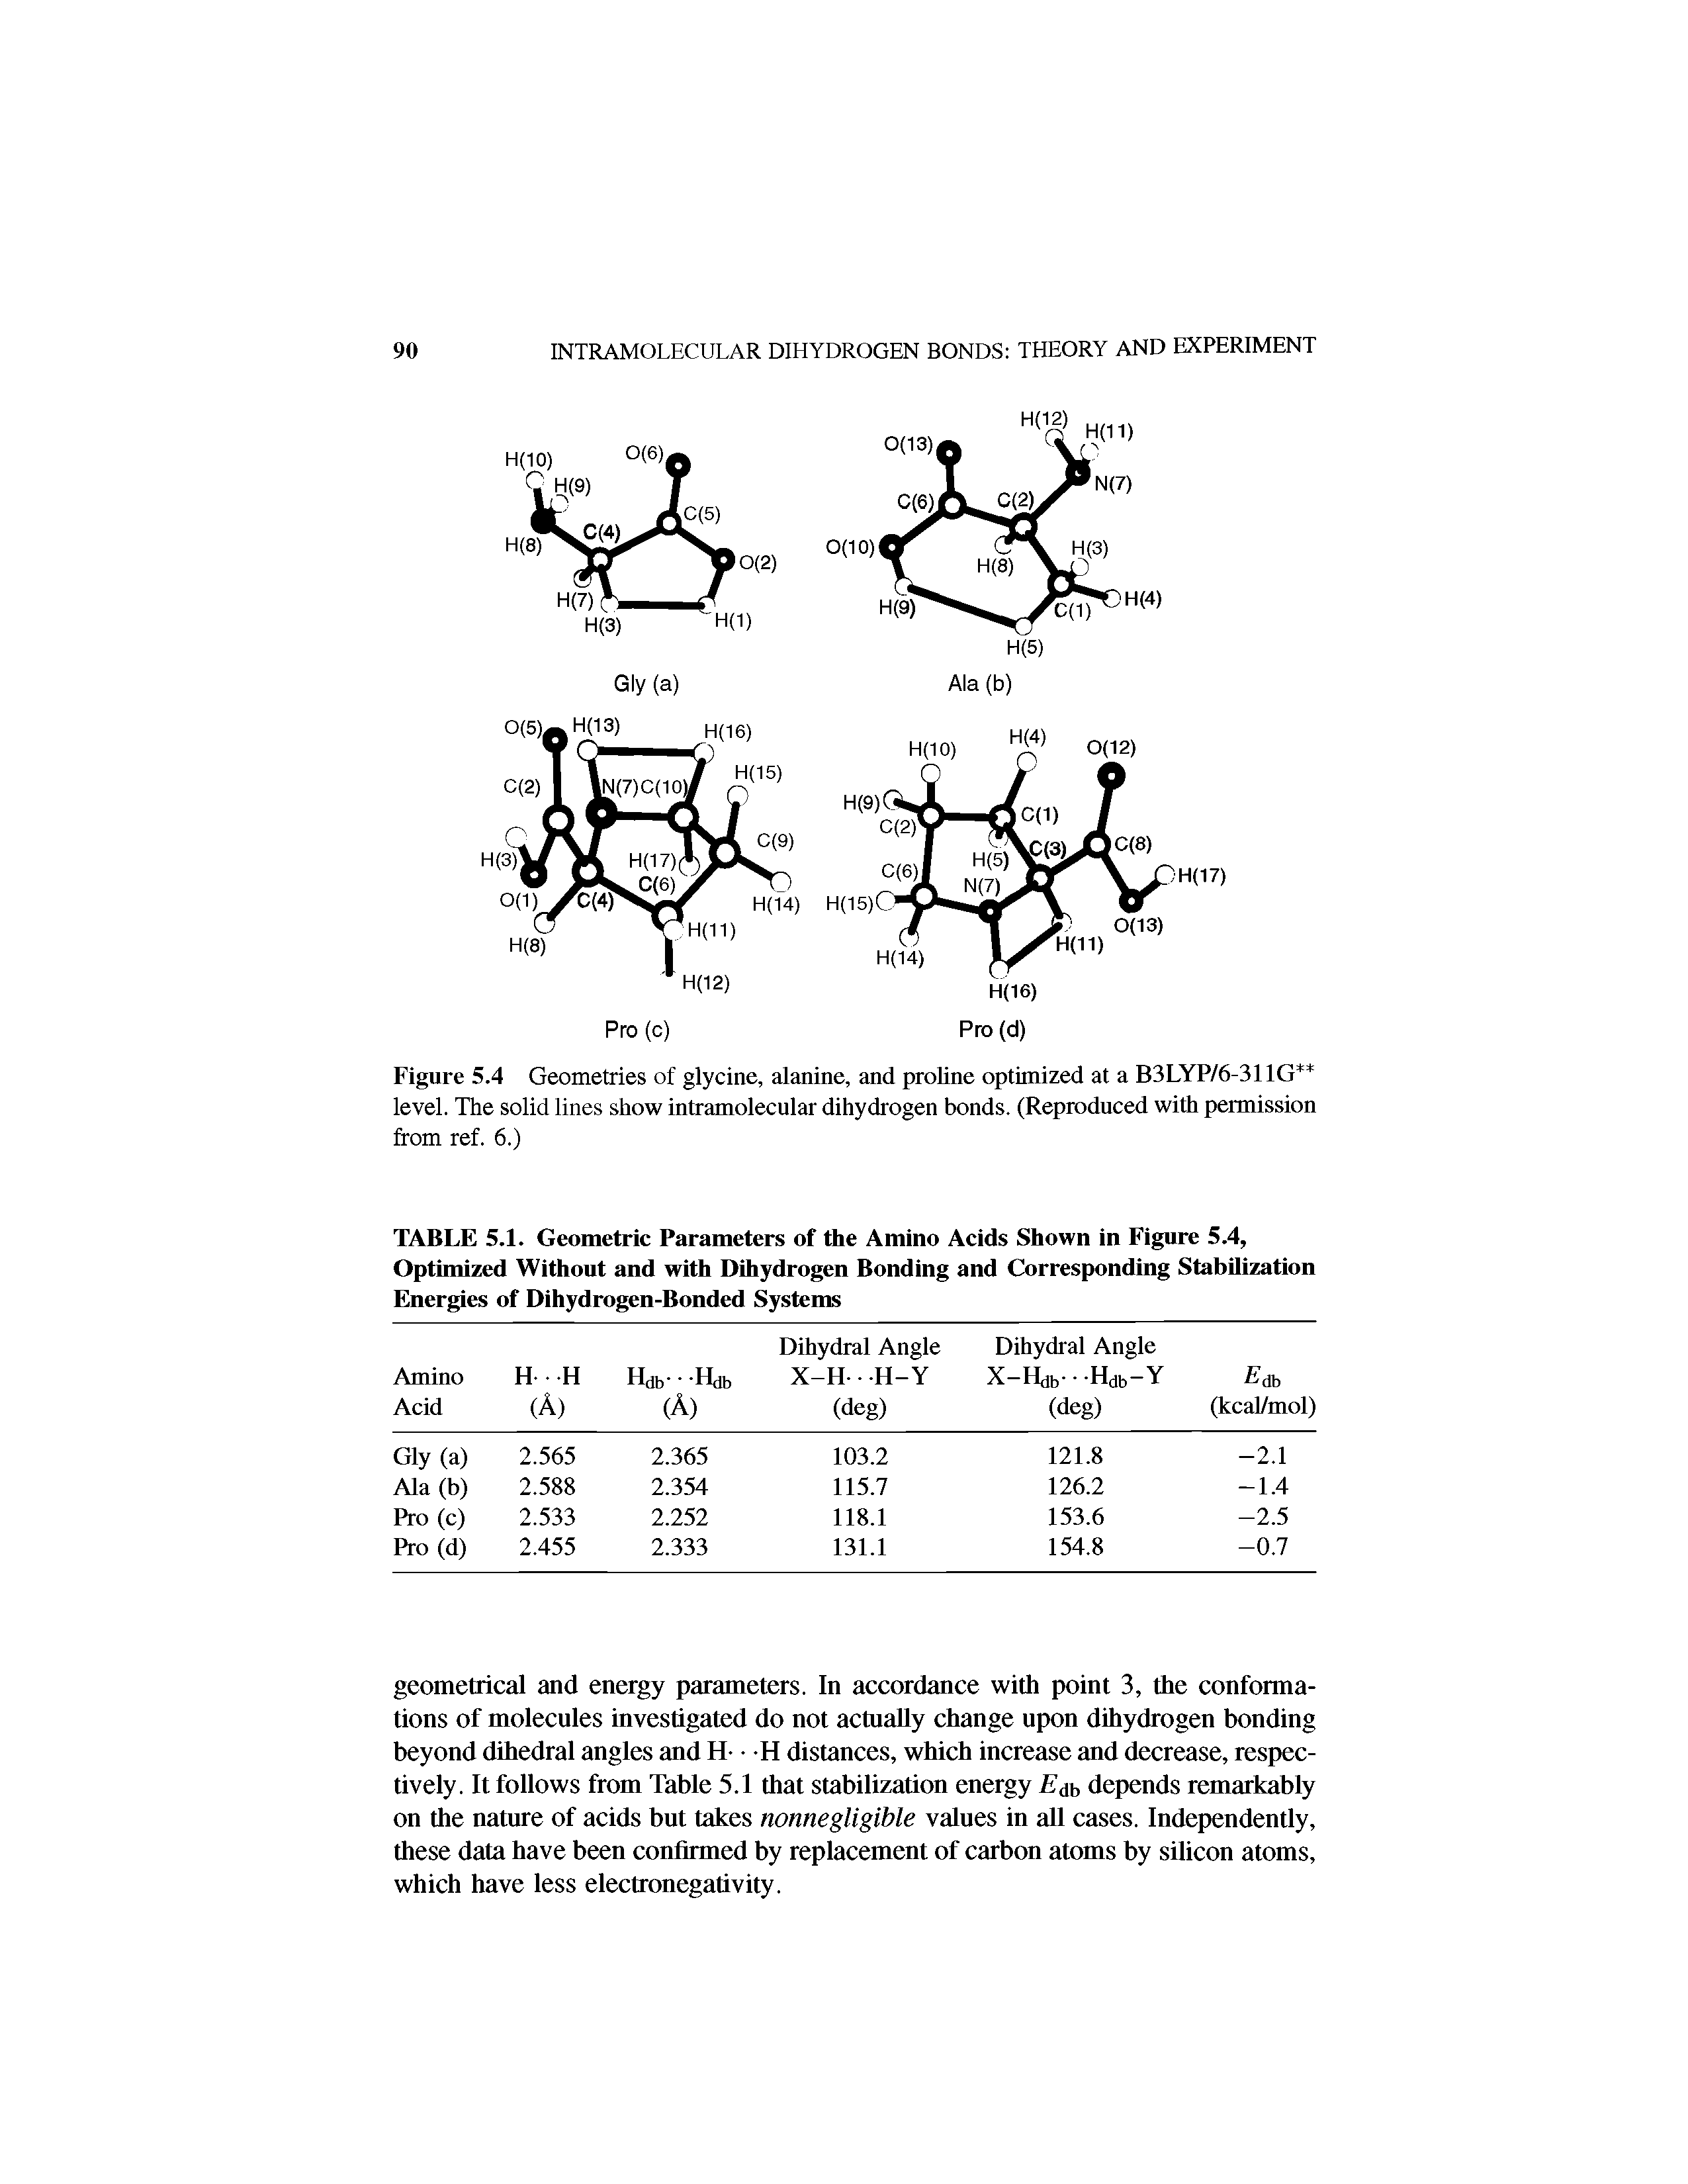 Figure 5.4 Geometries of glycine, alanine, and proUne optimized at a B3LYP/6-311G level. The solid lines show intramolecular dihydrogen bonds. (Reproduced with permission from ref. 6.)...